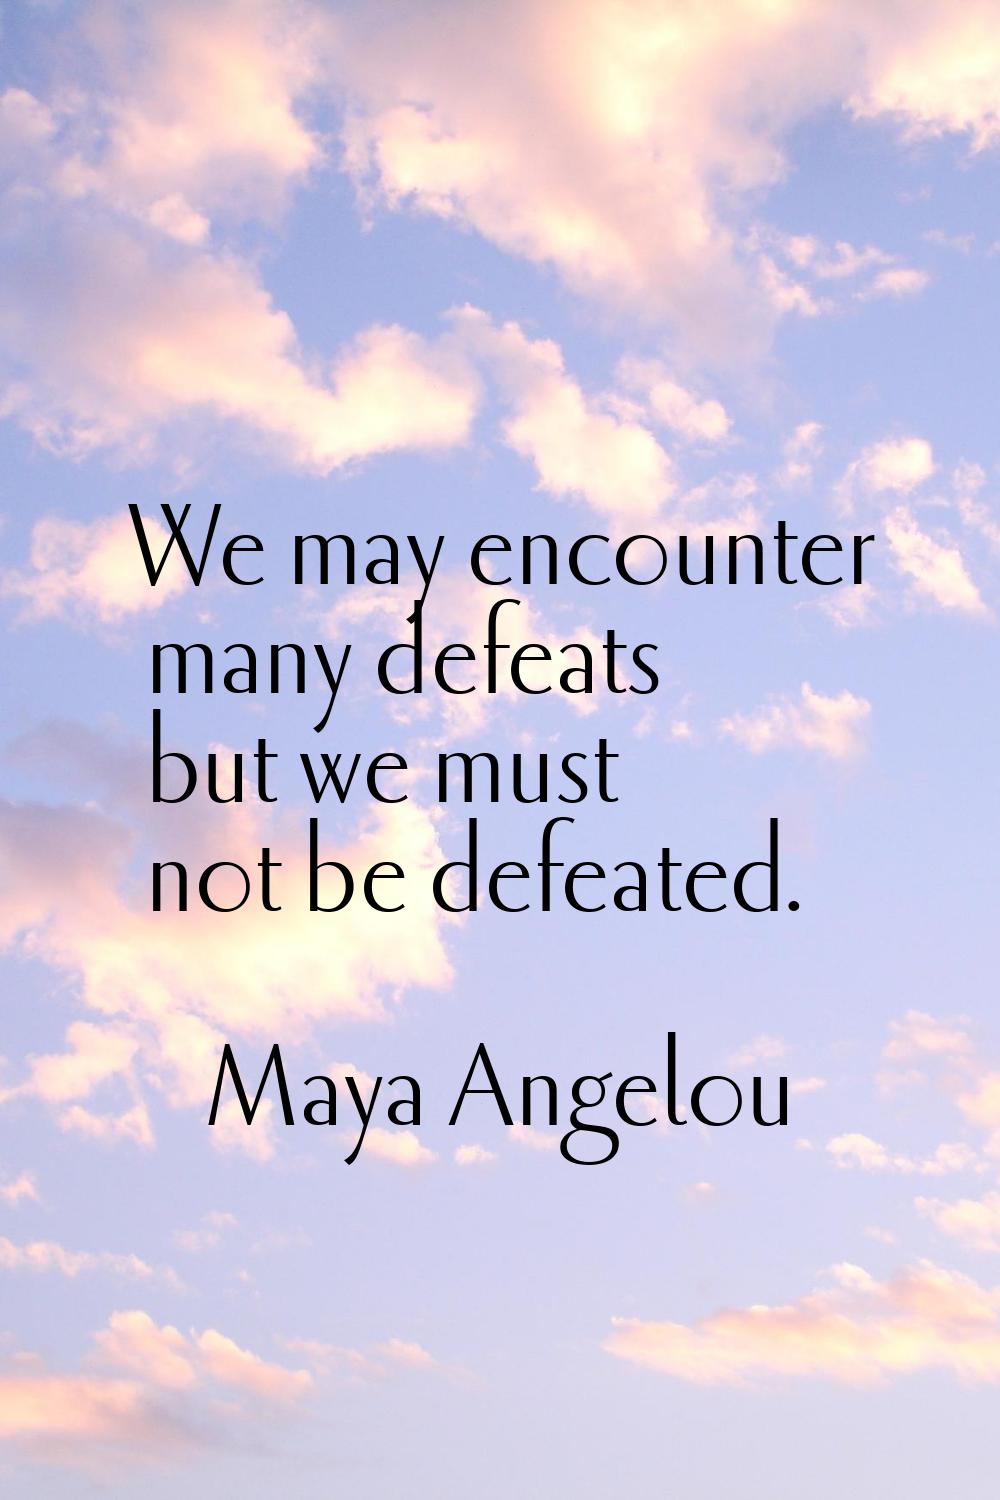 We may encounter many defeats but we must not be defeated.